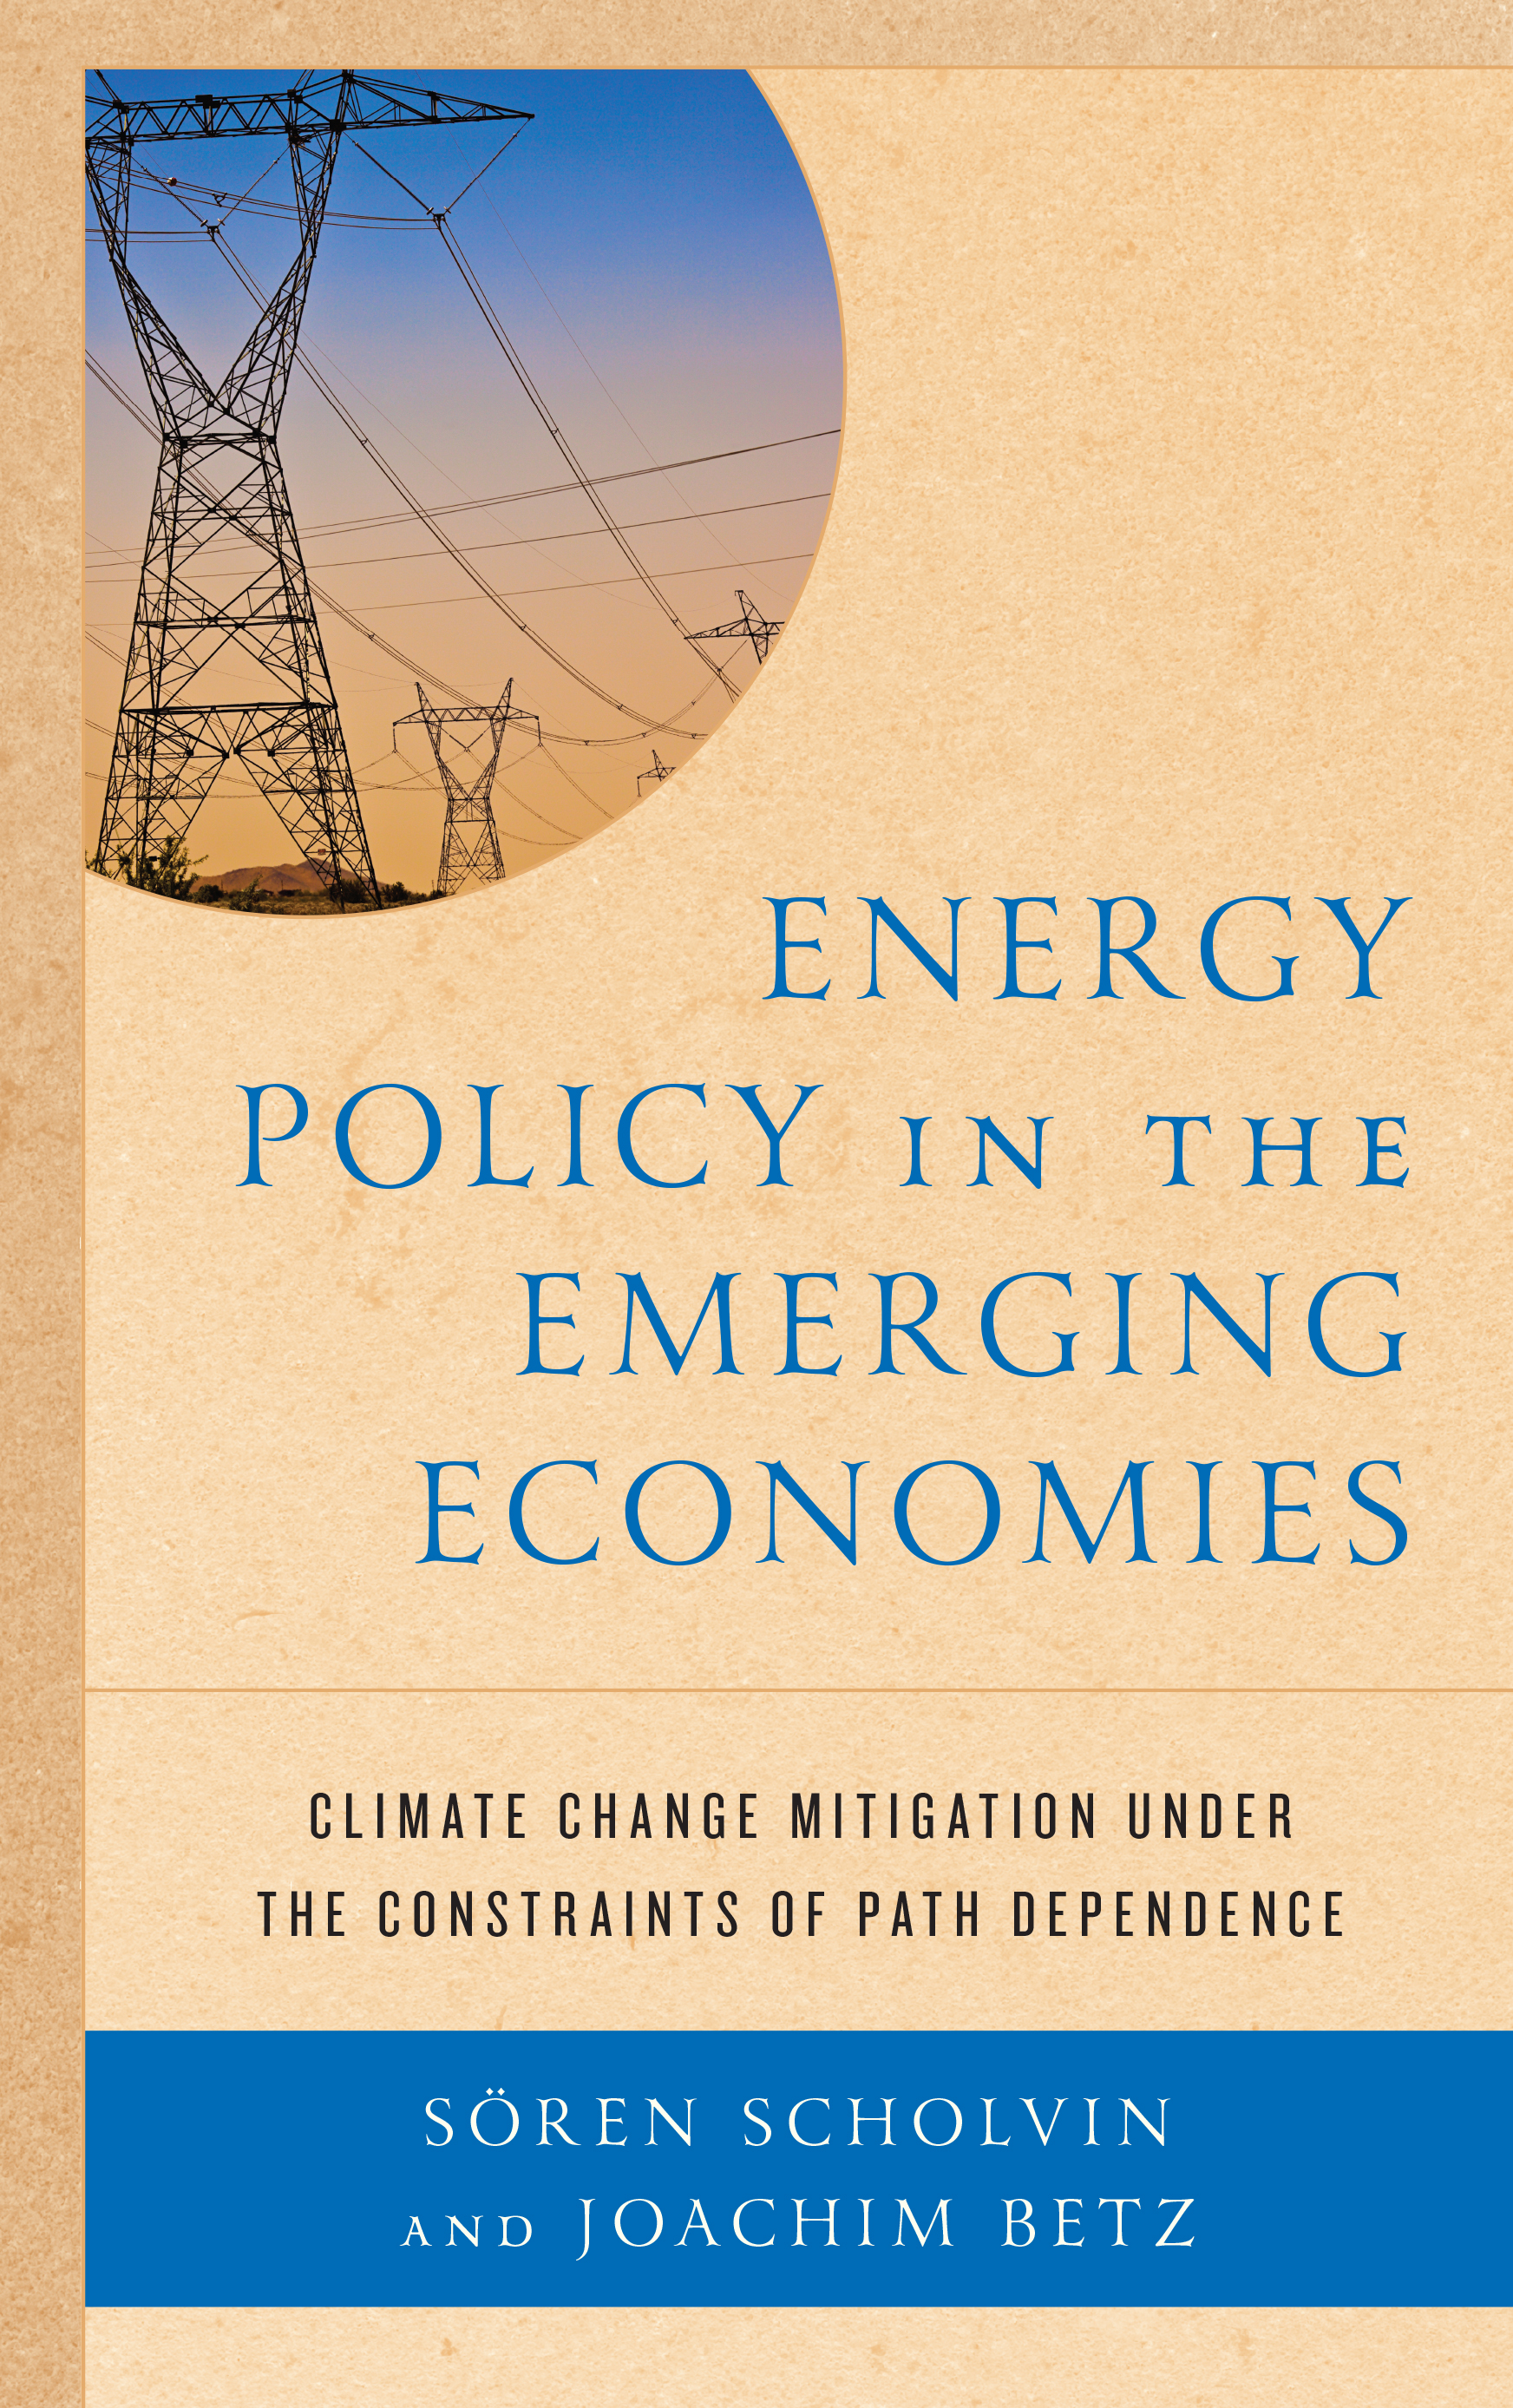 Energy Policy in the Emerging Economies: Climate Change Mitigation under the Constraints of Path Dependence